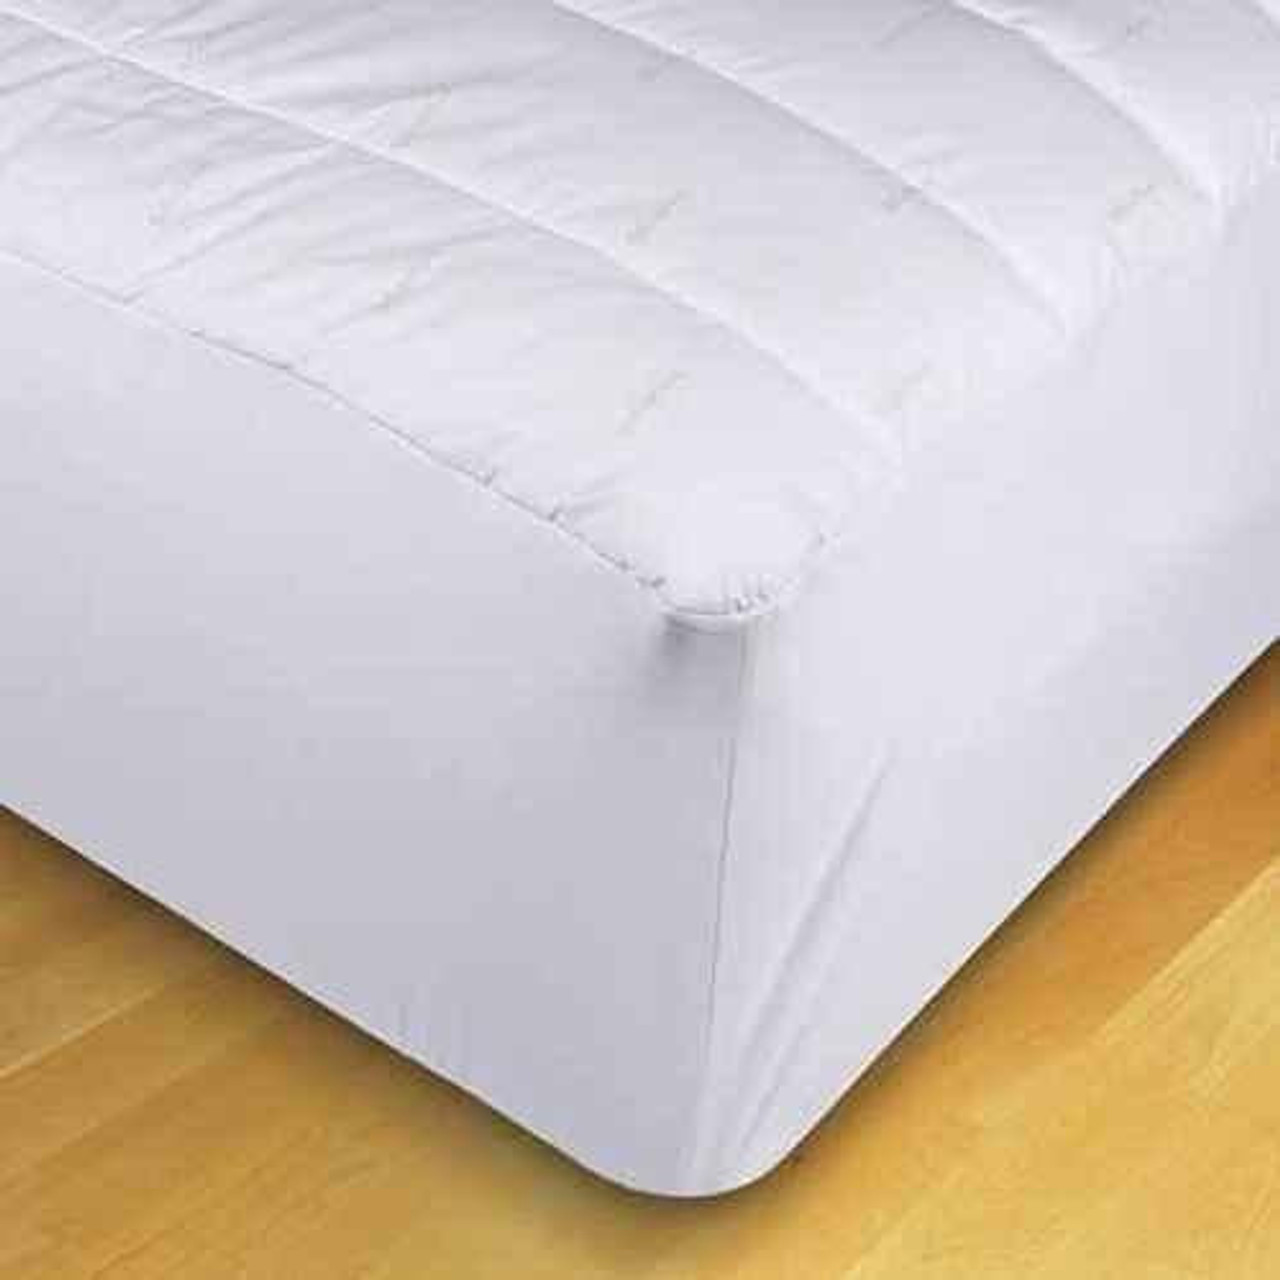 WestPoint/Martex Westpoint or Martex Ecopure or Fitted Mattress Pad - 20 Fitting or White or 2-4 Per Pack